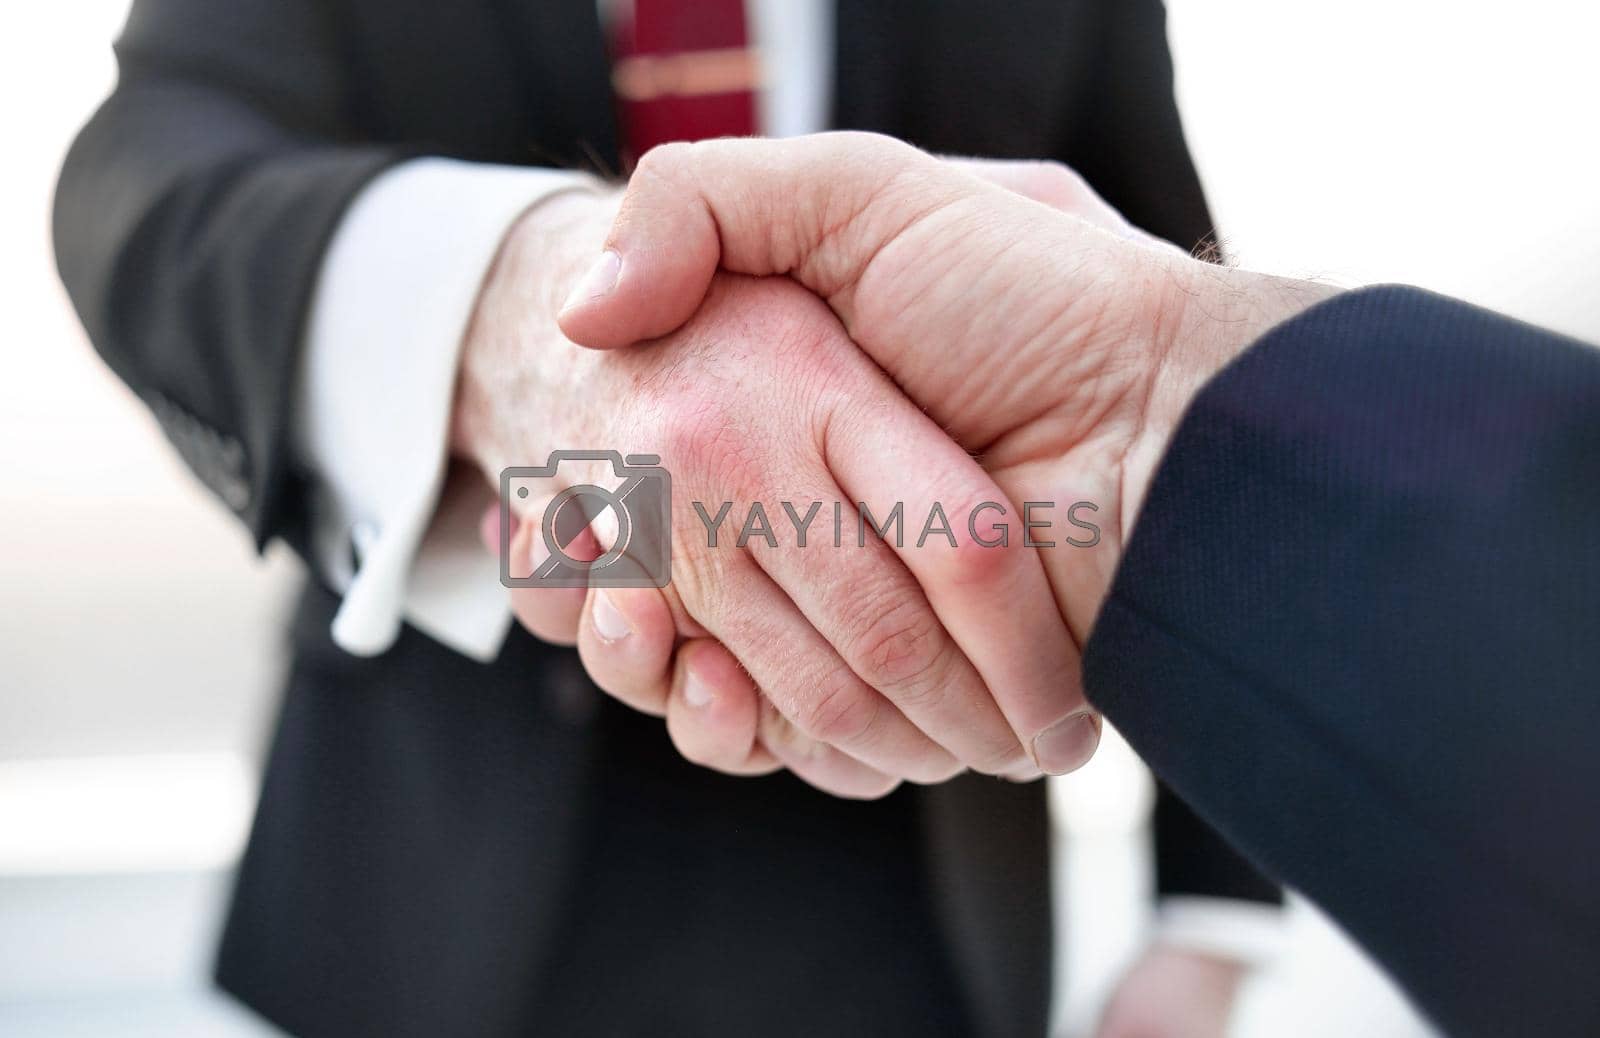 Royalty free image of close up.handshake business partners. by asdf